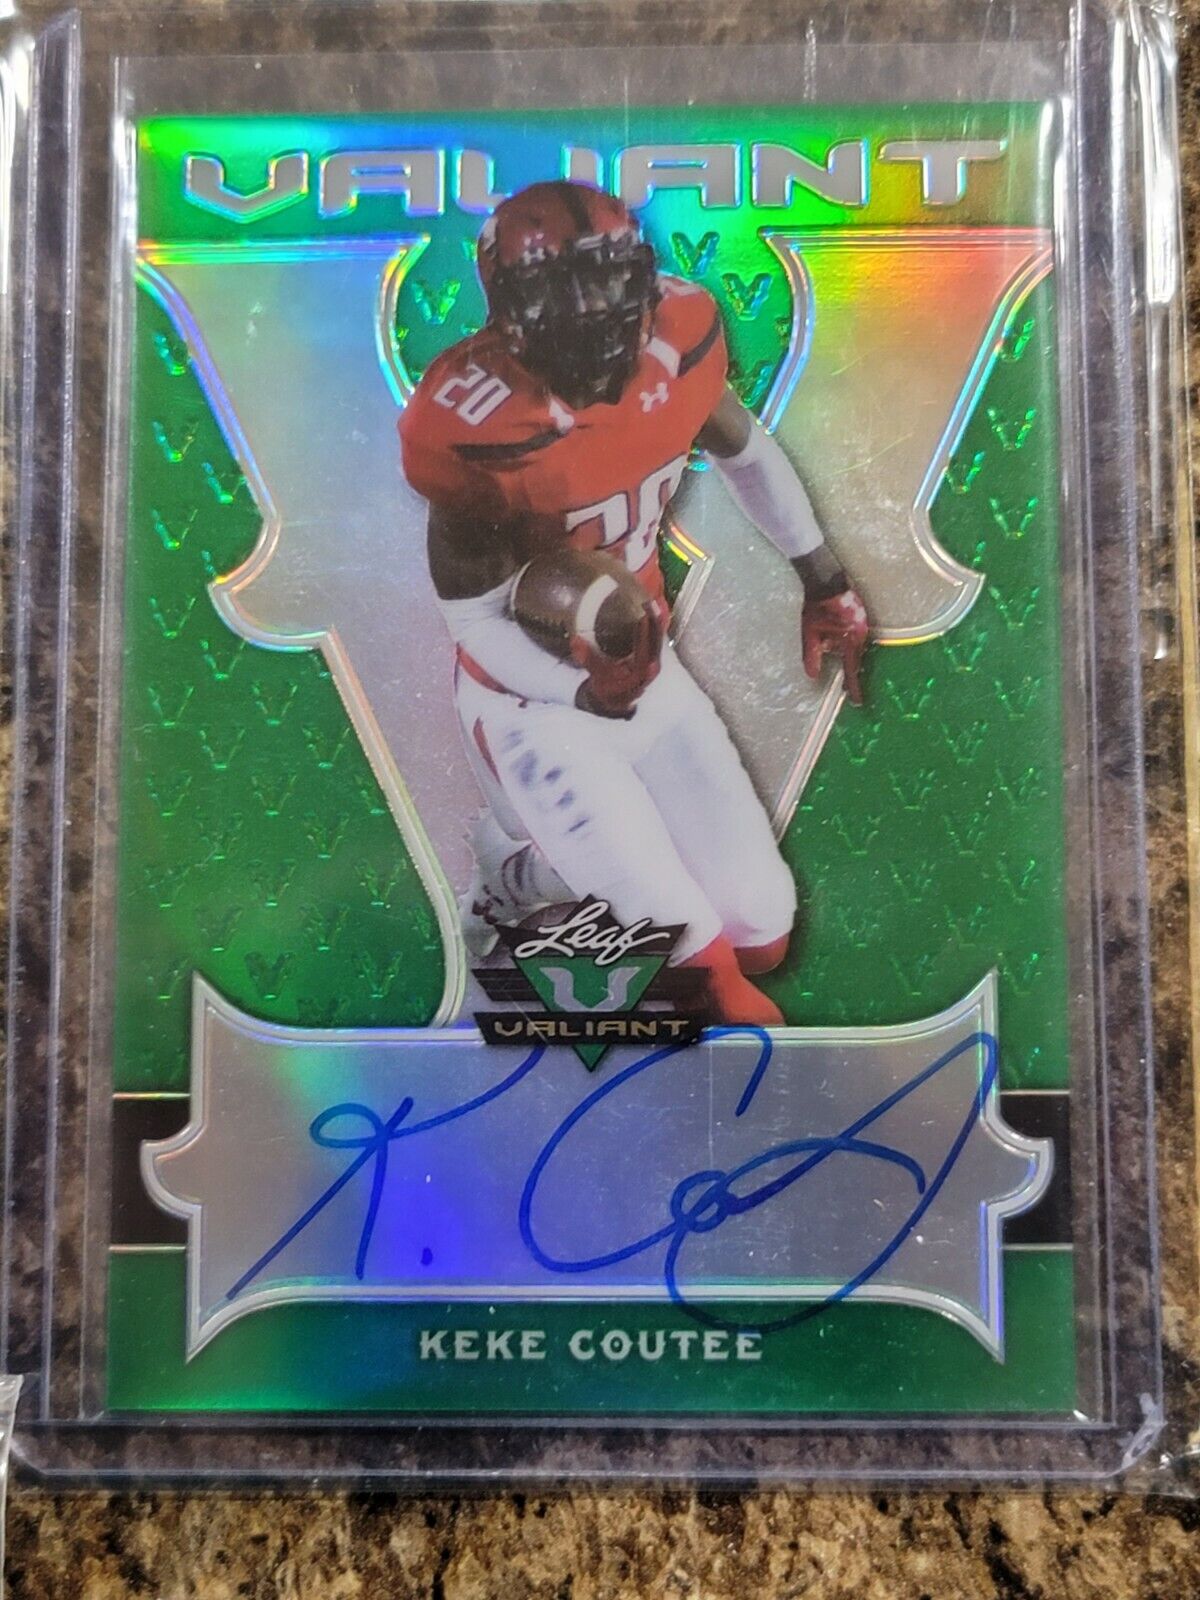 2018 Keke Coutee 8 CARD ROOKIE LOT--ALL AUTOGRAPHS--MOST ARE SERIAL #--L@@k!!! Без бренда - фотография #4